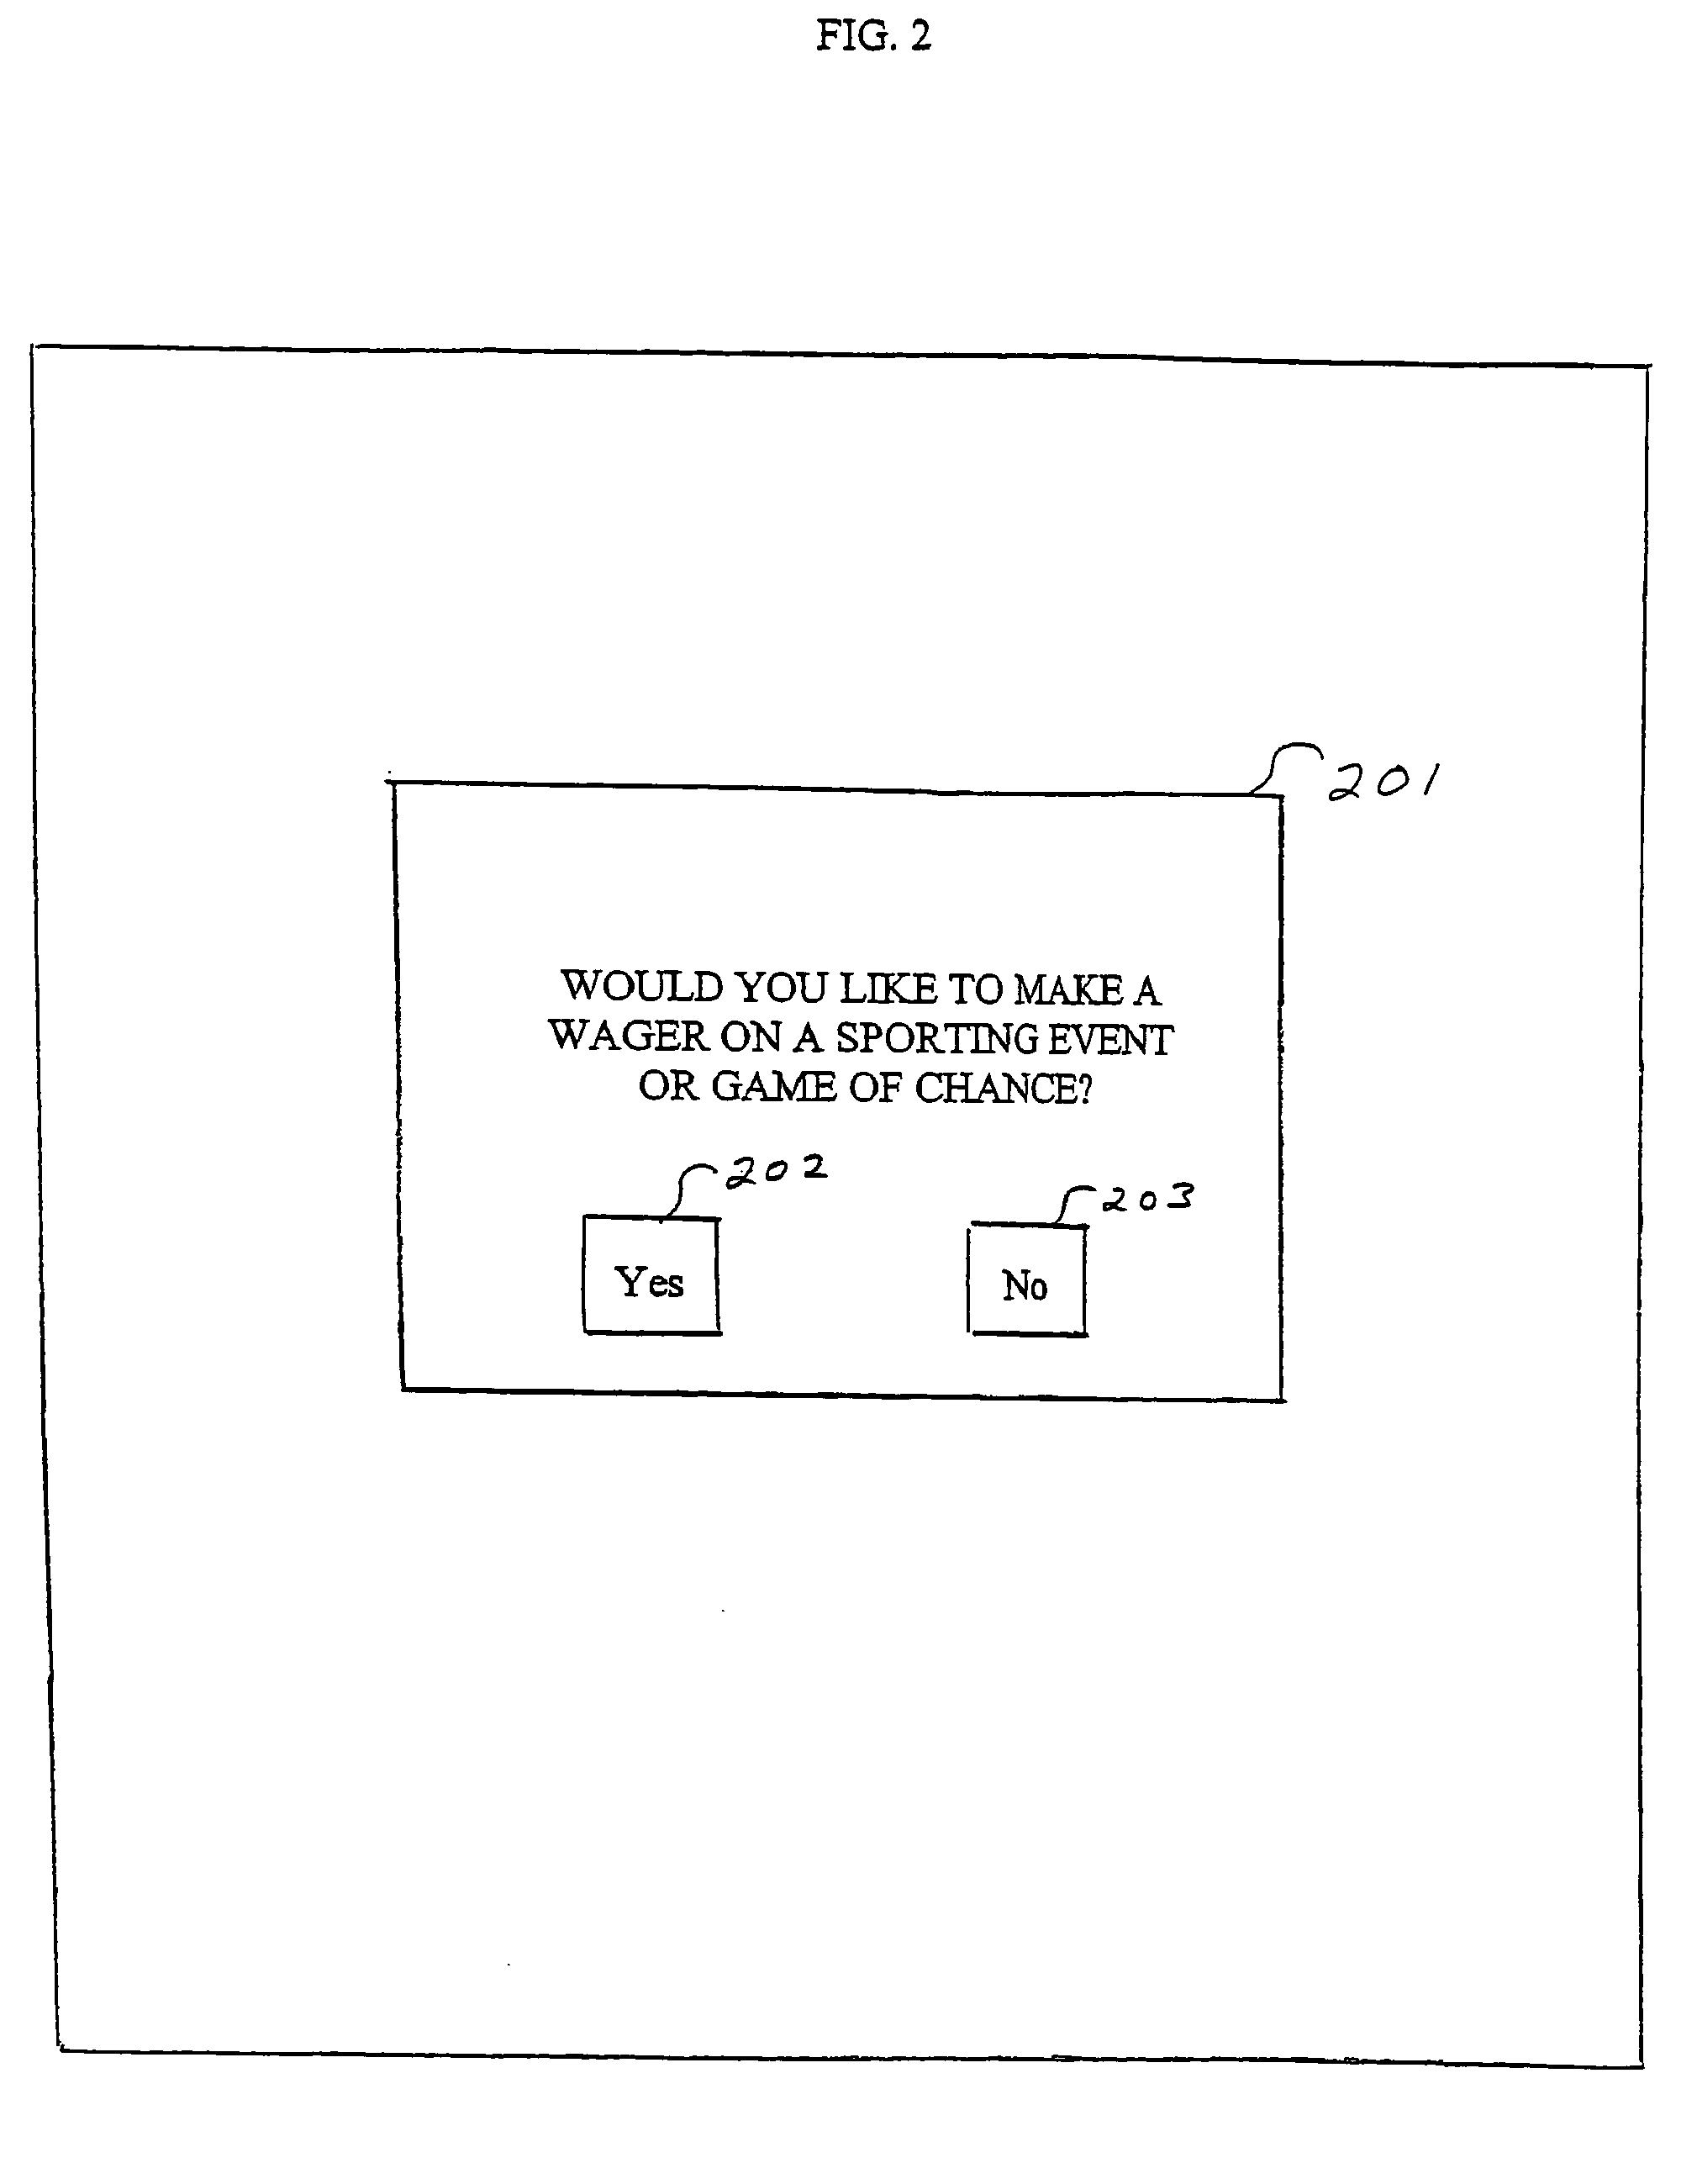 Video gaming device having a system and method for completing wagers and purchases during the cash out process